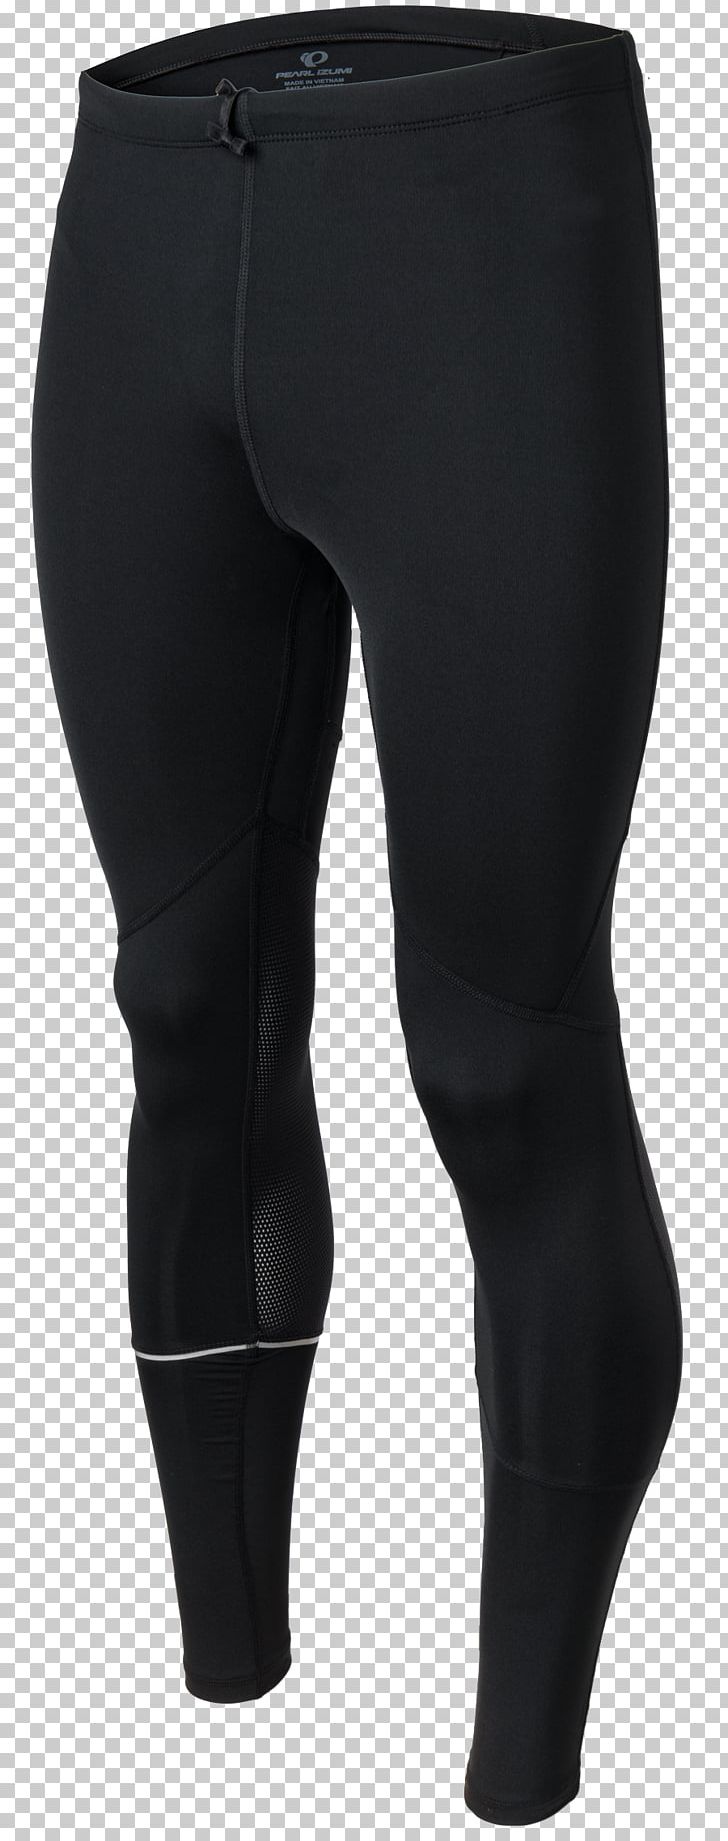 Leggings Knee PNG, Clipart, Active Undergarment, Joint, Knee, Leggings, Others Free PNG Download